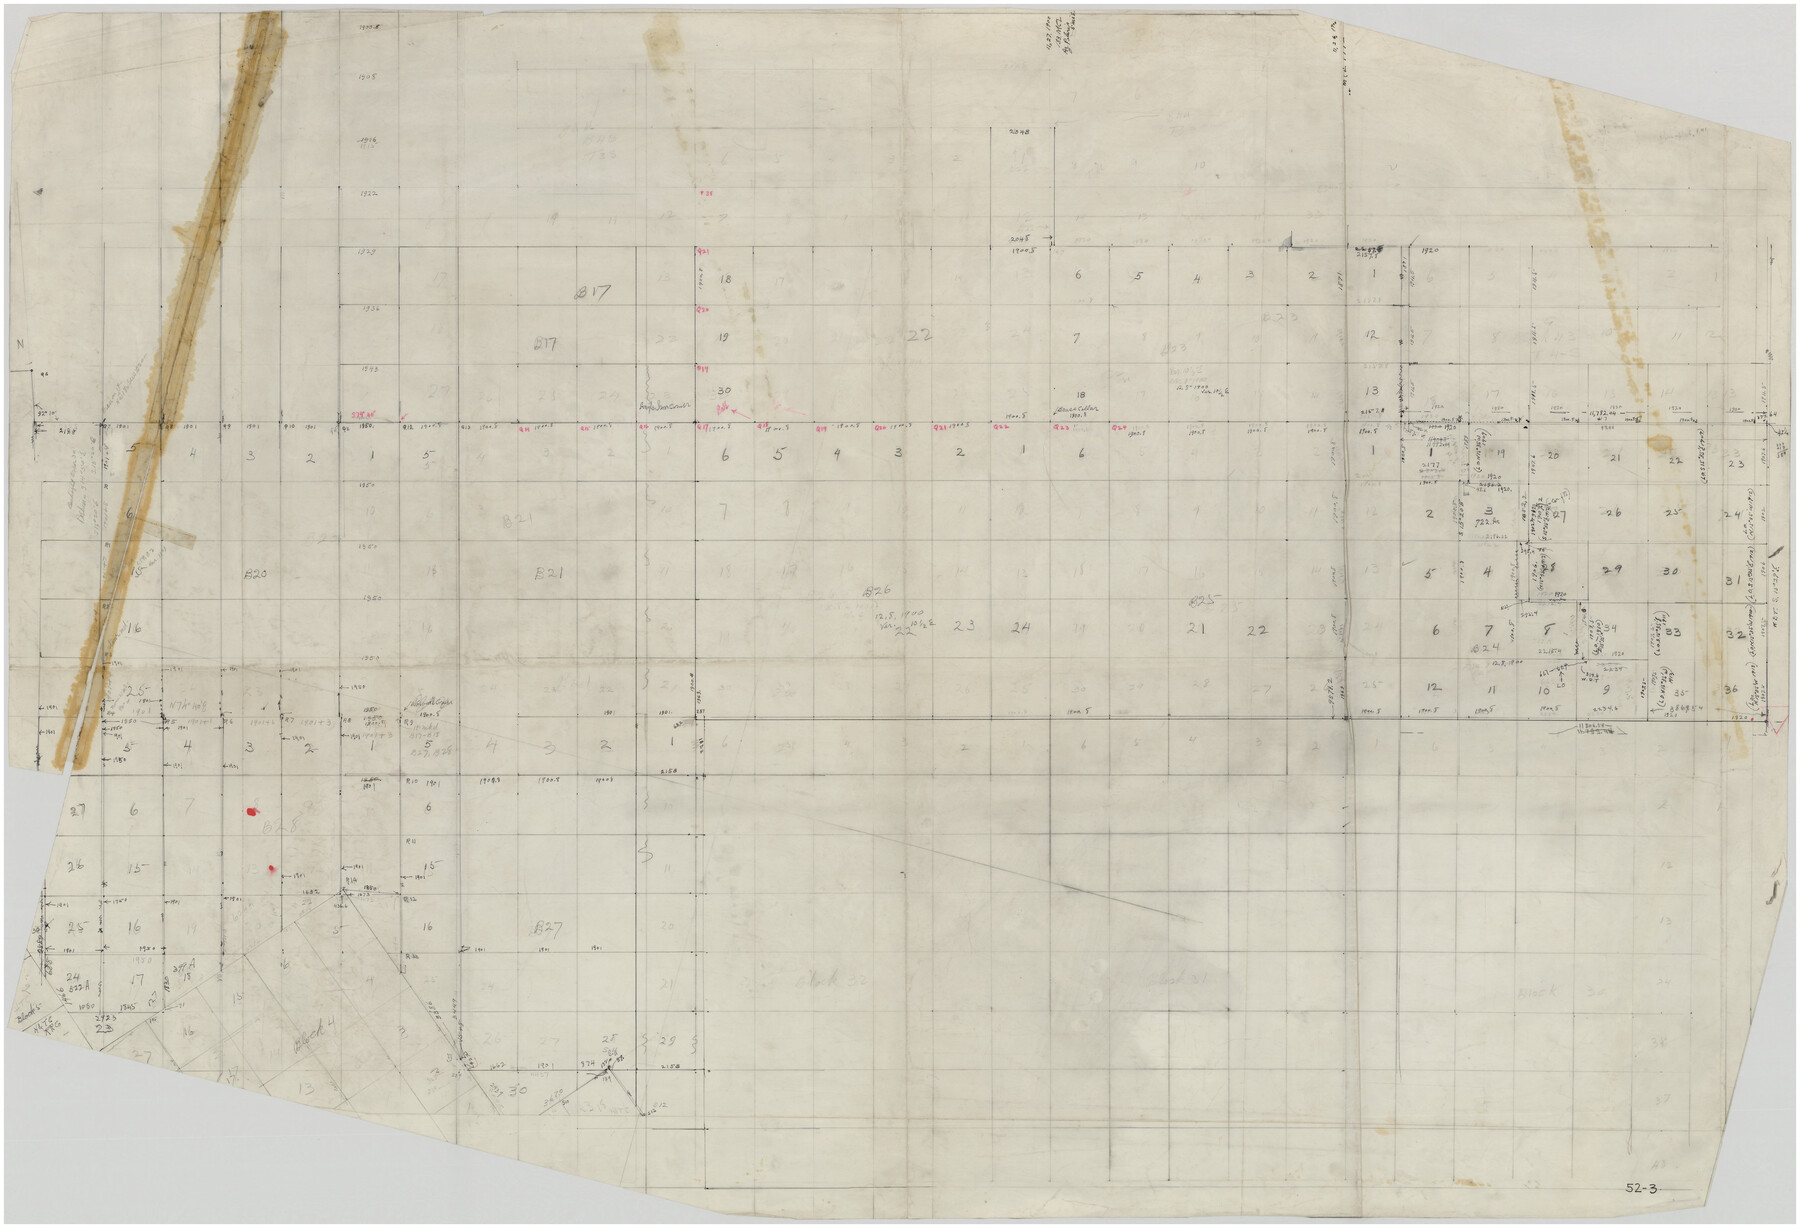 89734, [Pencil sketch showing blocks B17, B20-B28 and surrounding], Twichell Survey Records